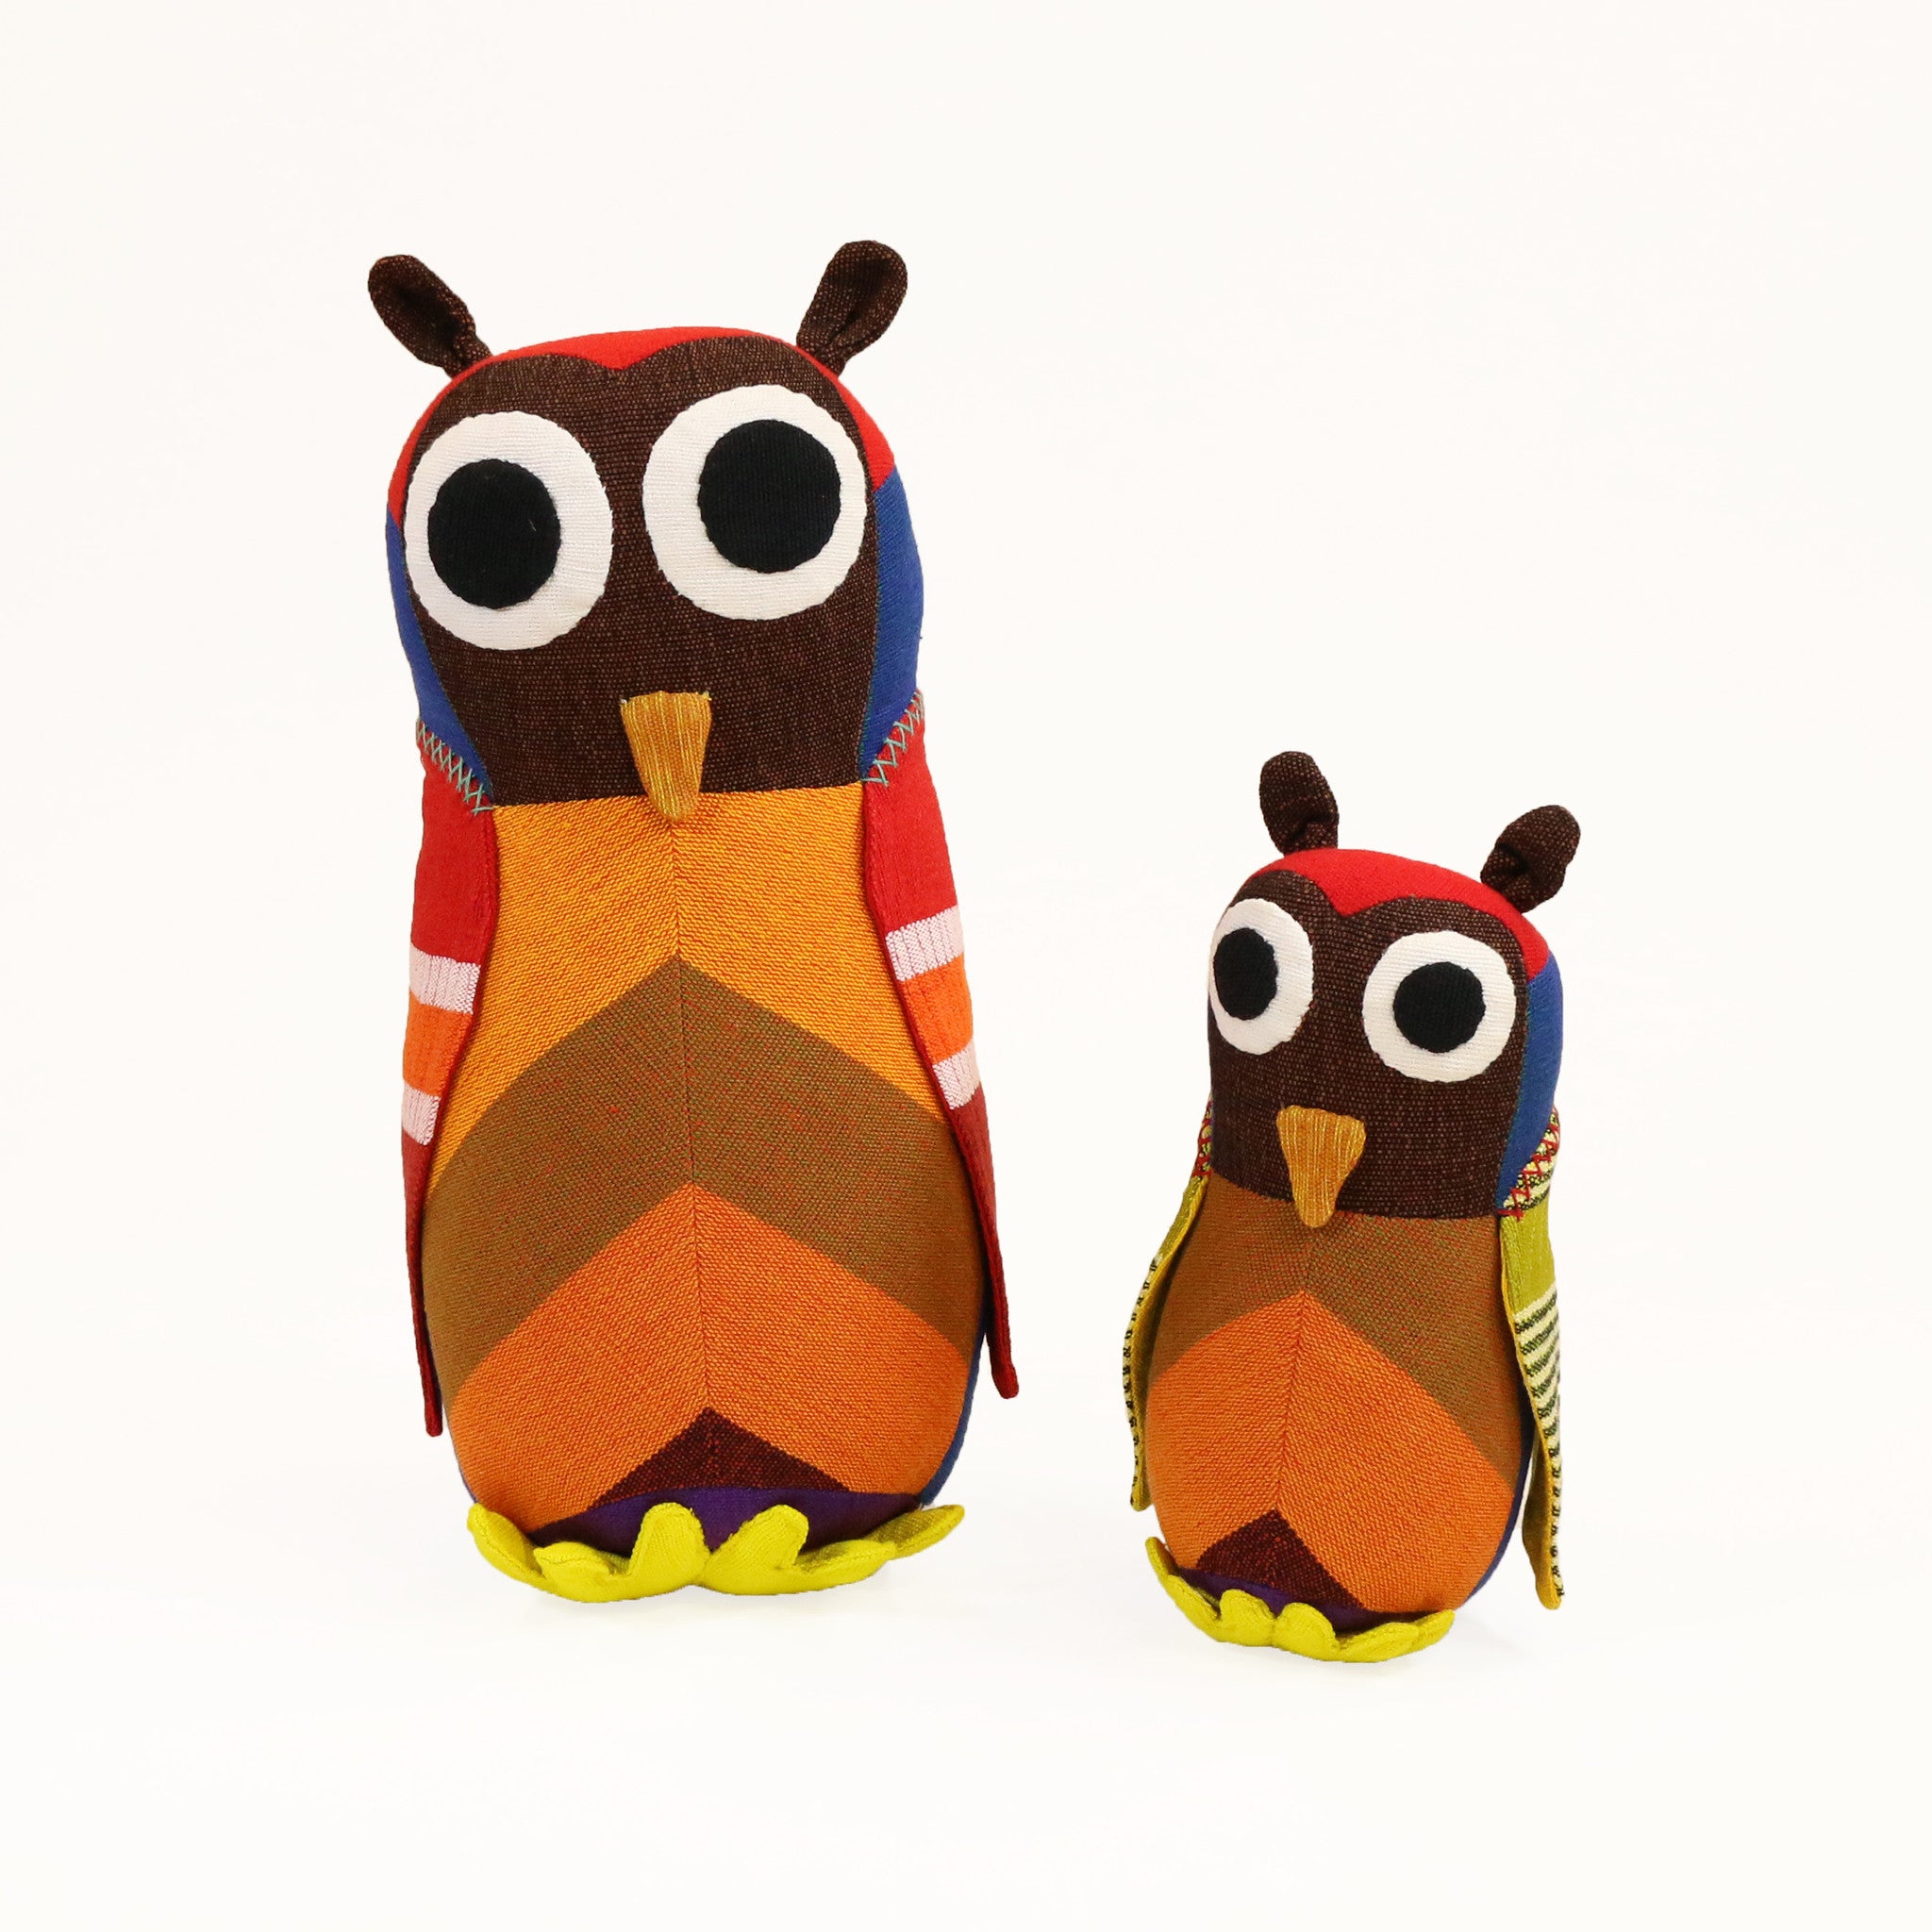 Owl Toy - Homer, the Owl (small & large sizes)